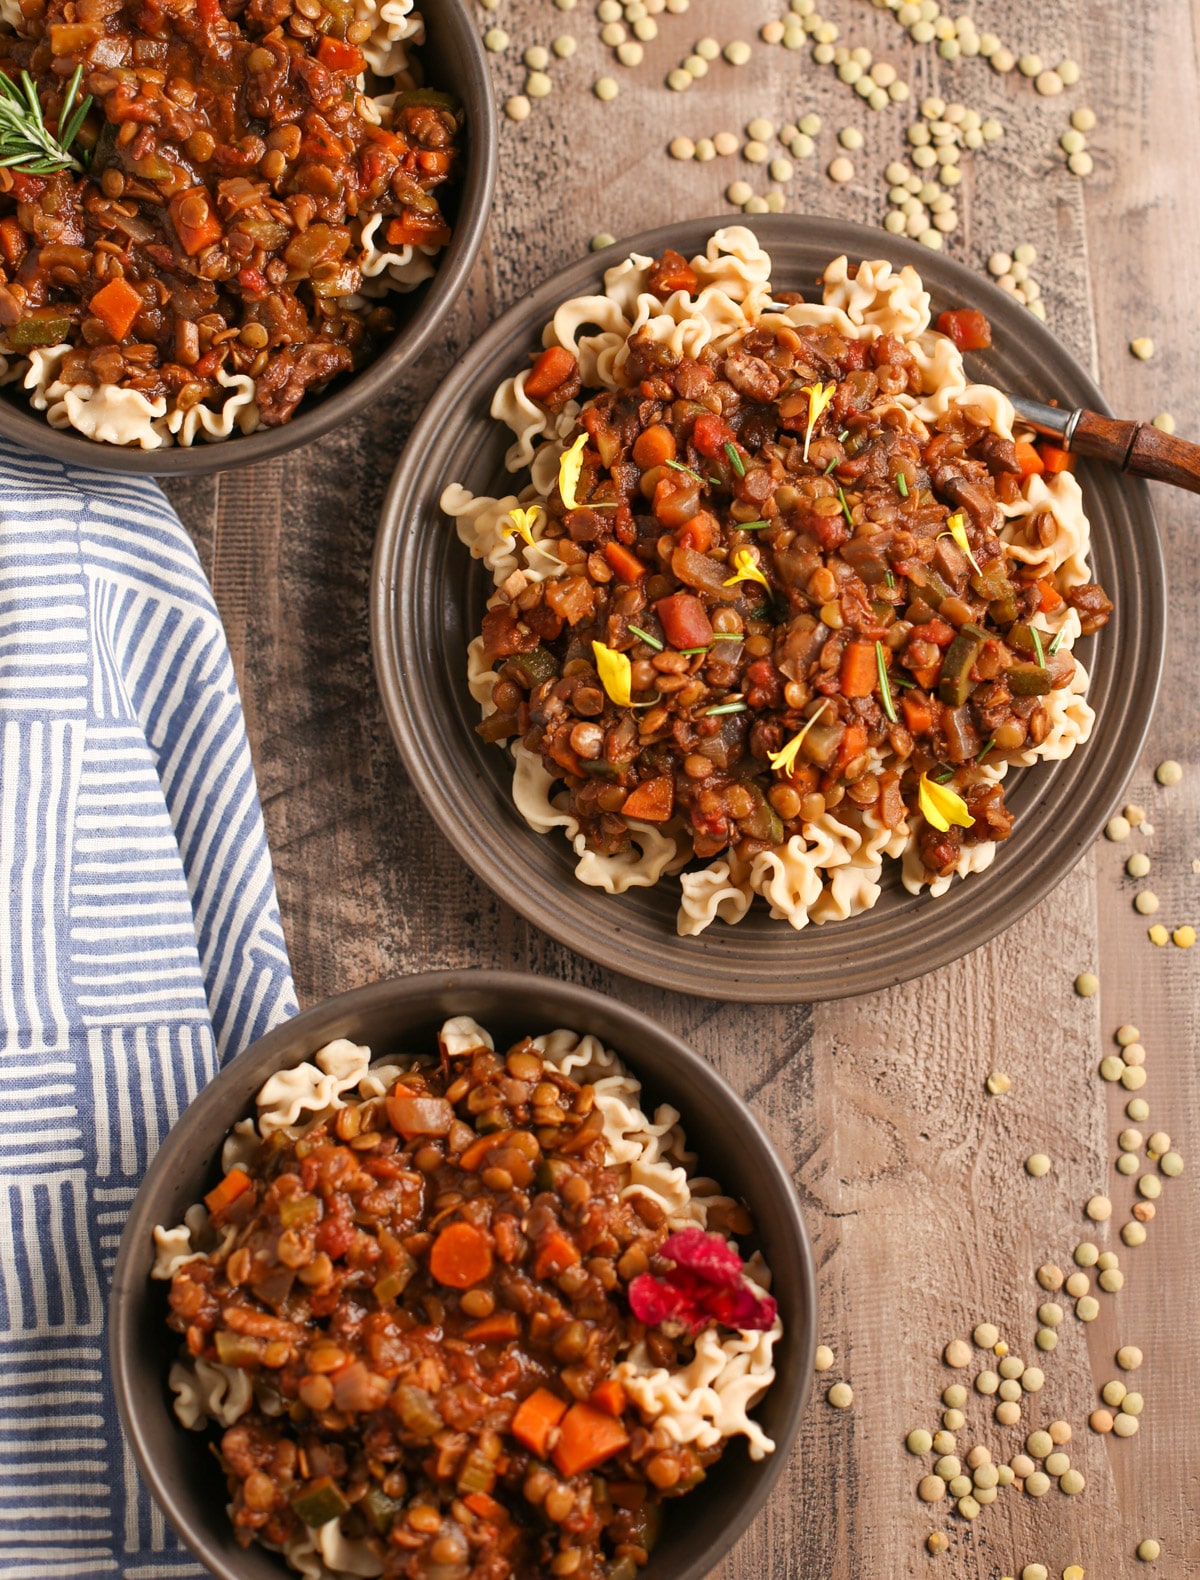 Three bowls of lentil bolognese with colorful garnishes